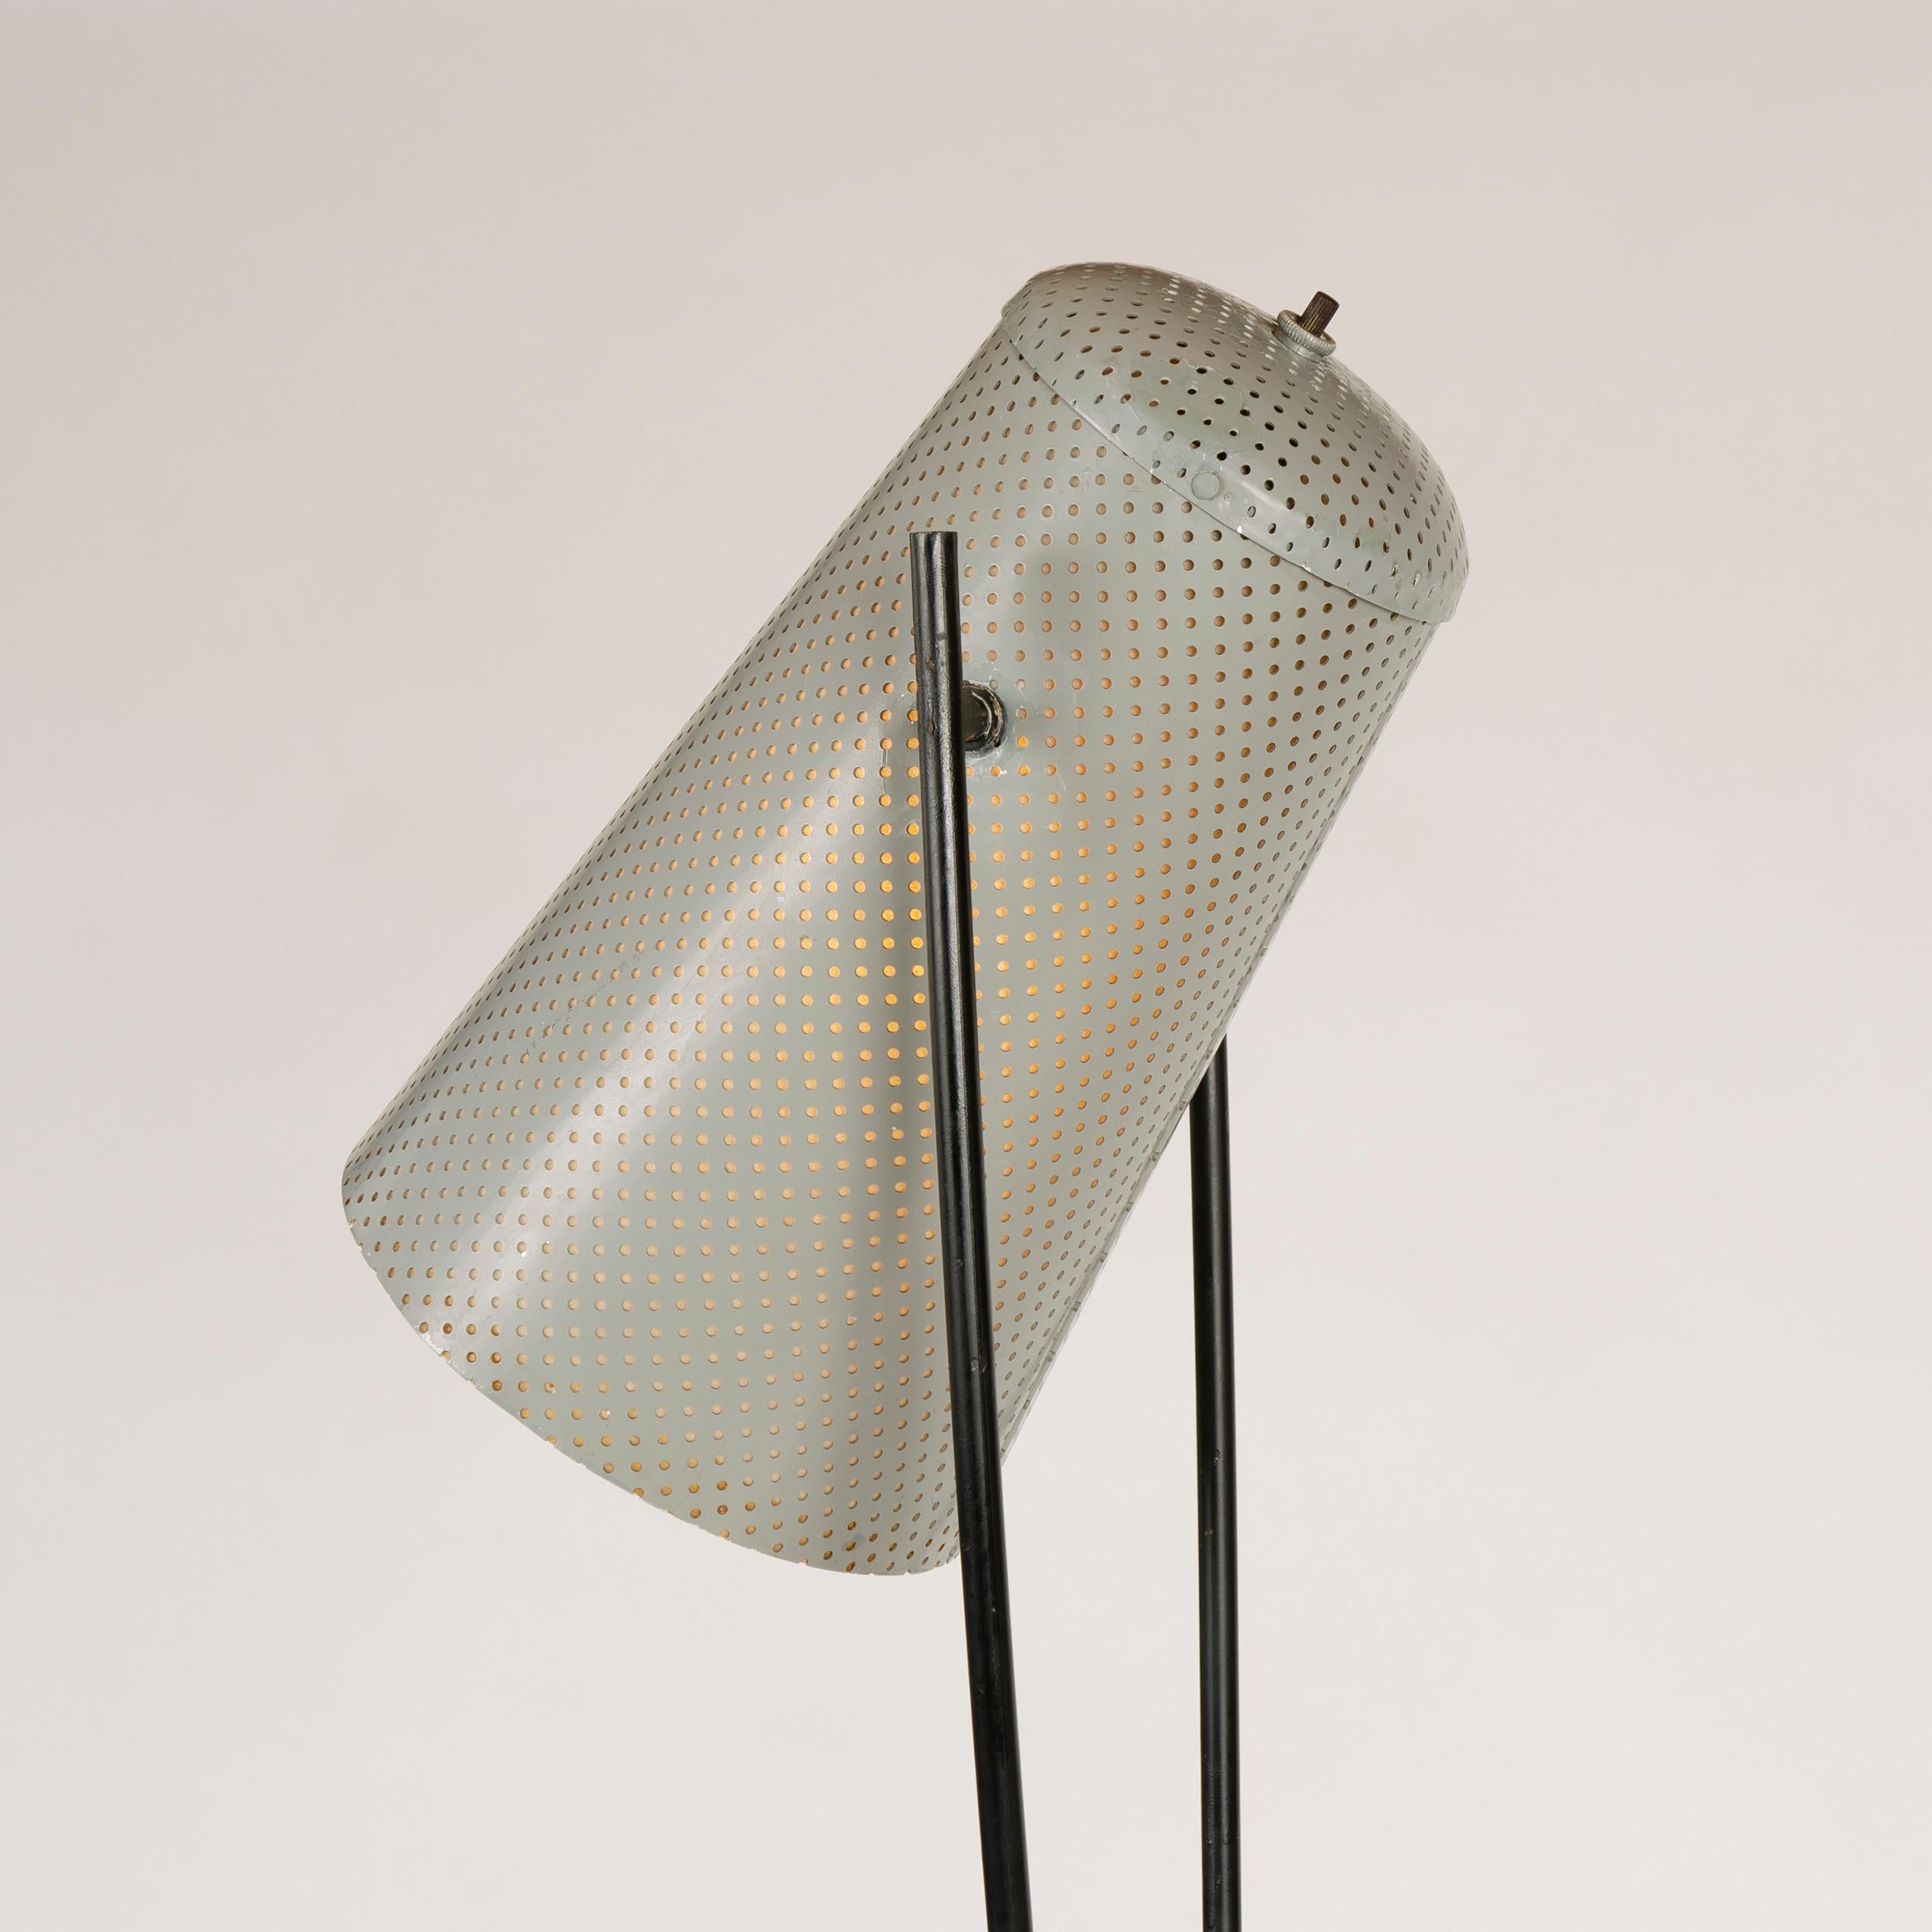 Mid-20th Century 1950s Adjustable Perforated Floor Lamp by Ben Seibel for Raymor